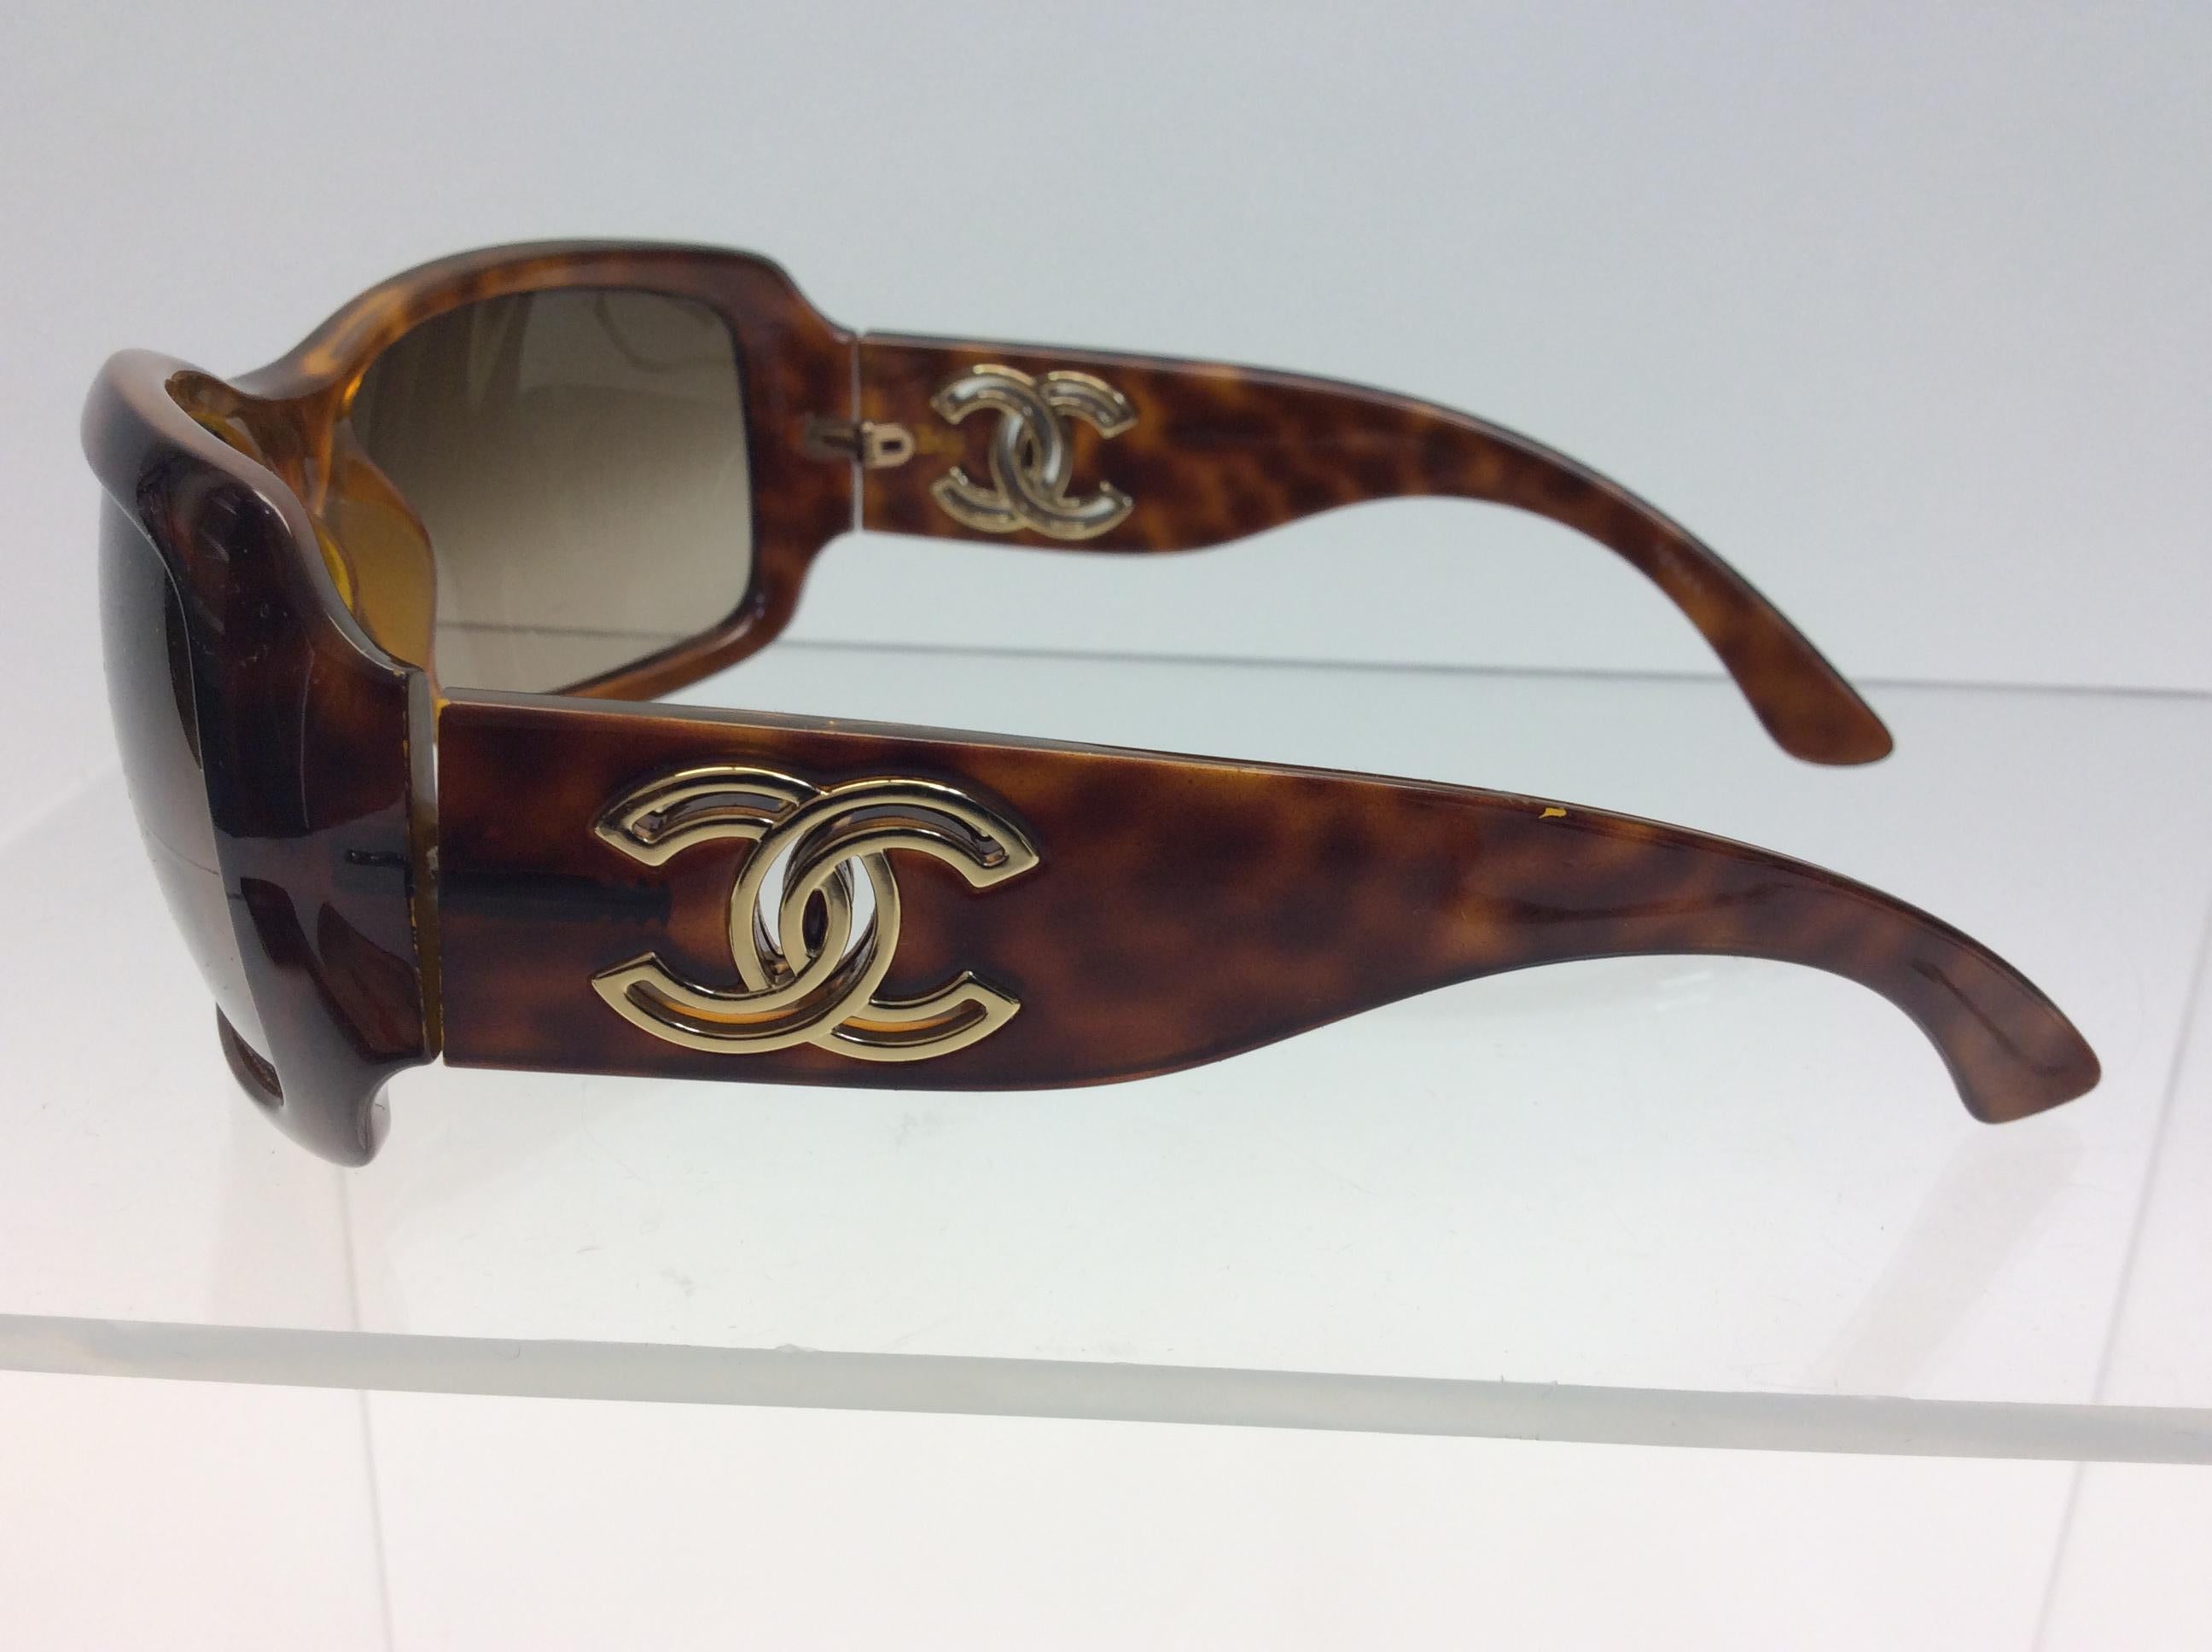 Chanel Tortoise Sunglasses with Gold
$299
Comes with case 
Made in Italy
